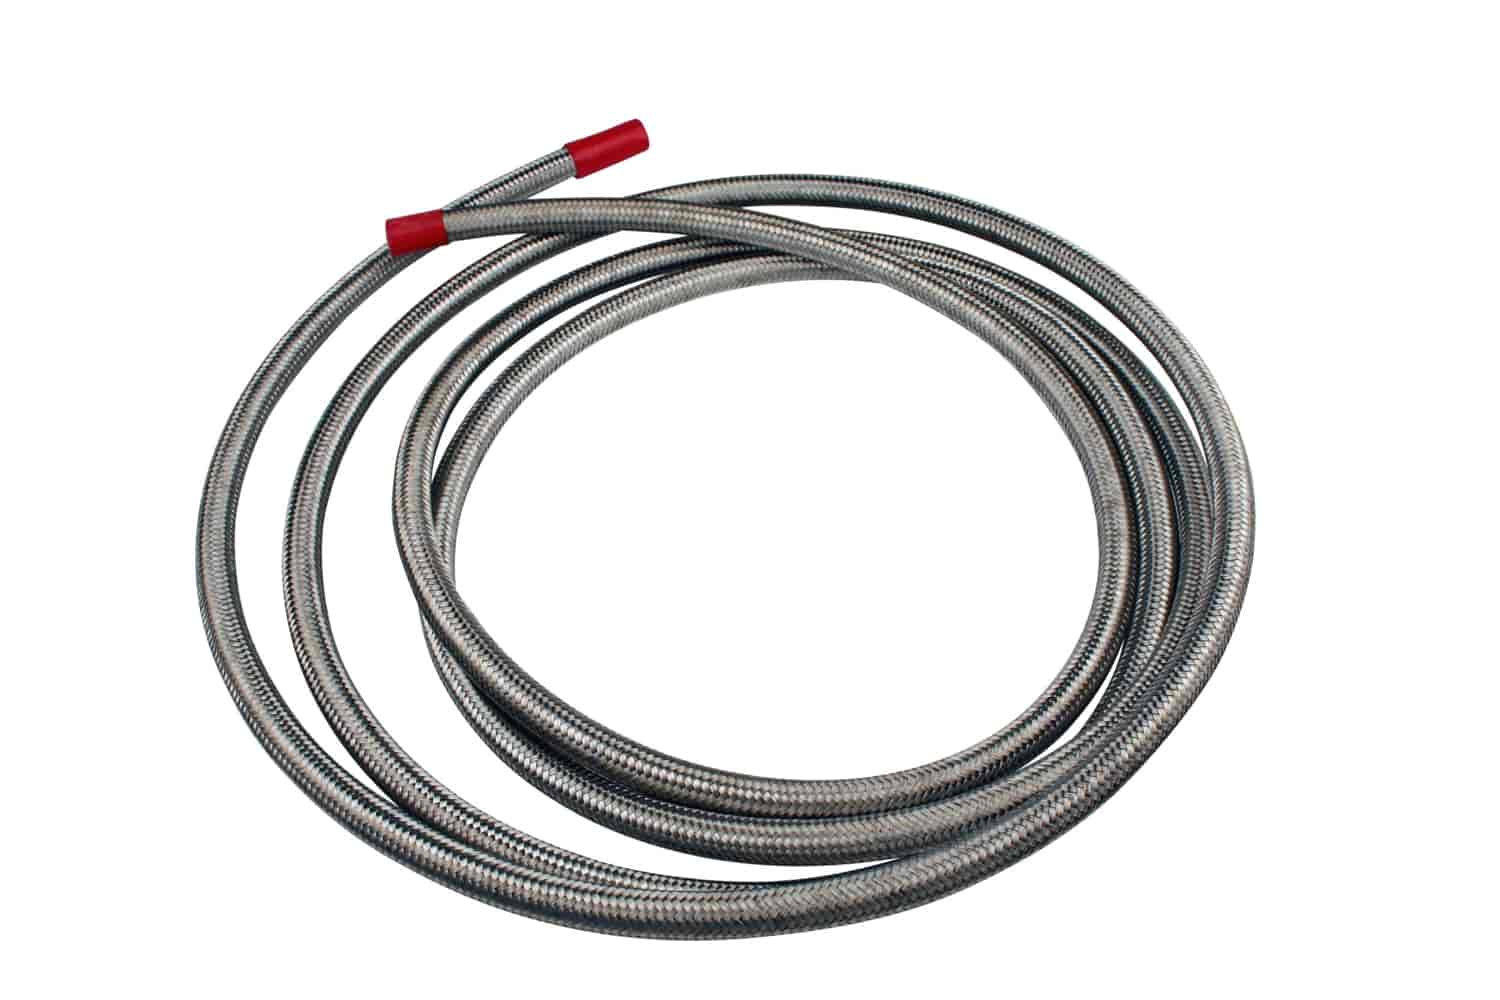 Braided Stainless Steel Fuel Hose -6AN x 12 ft